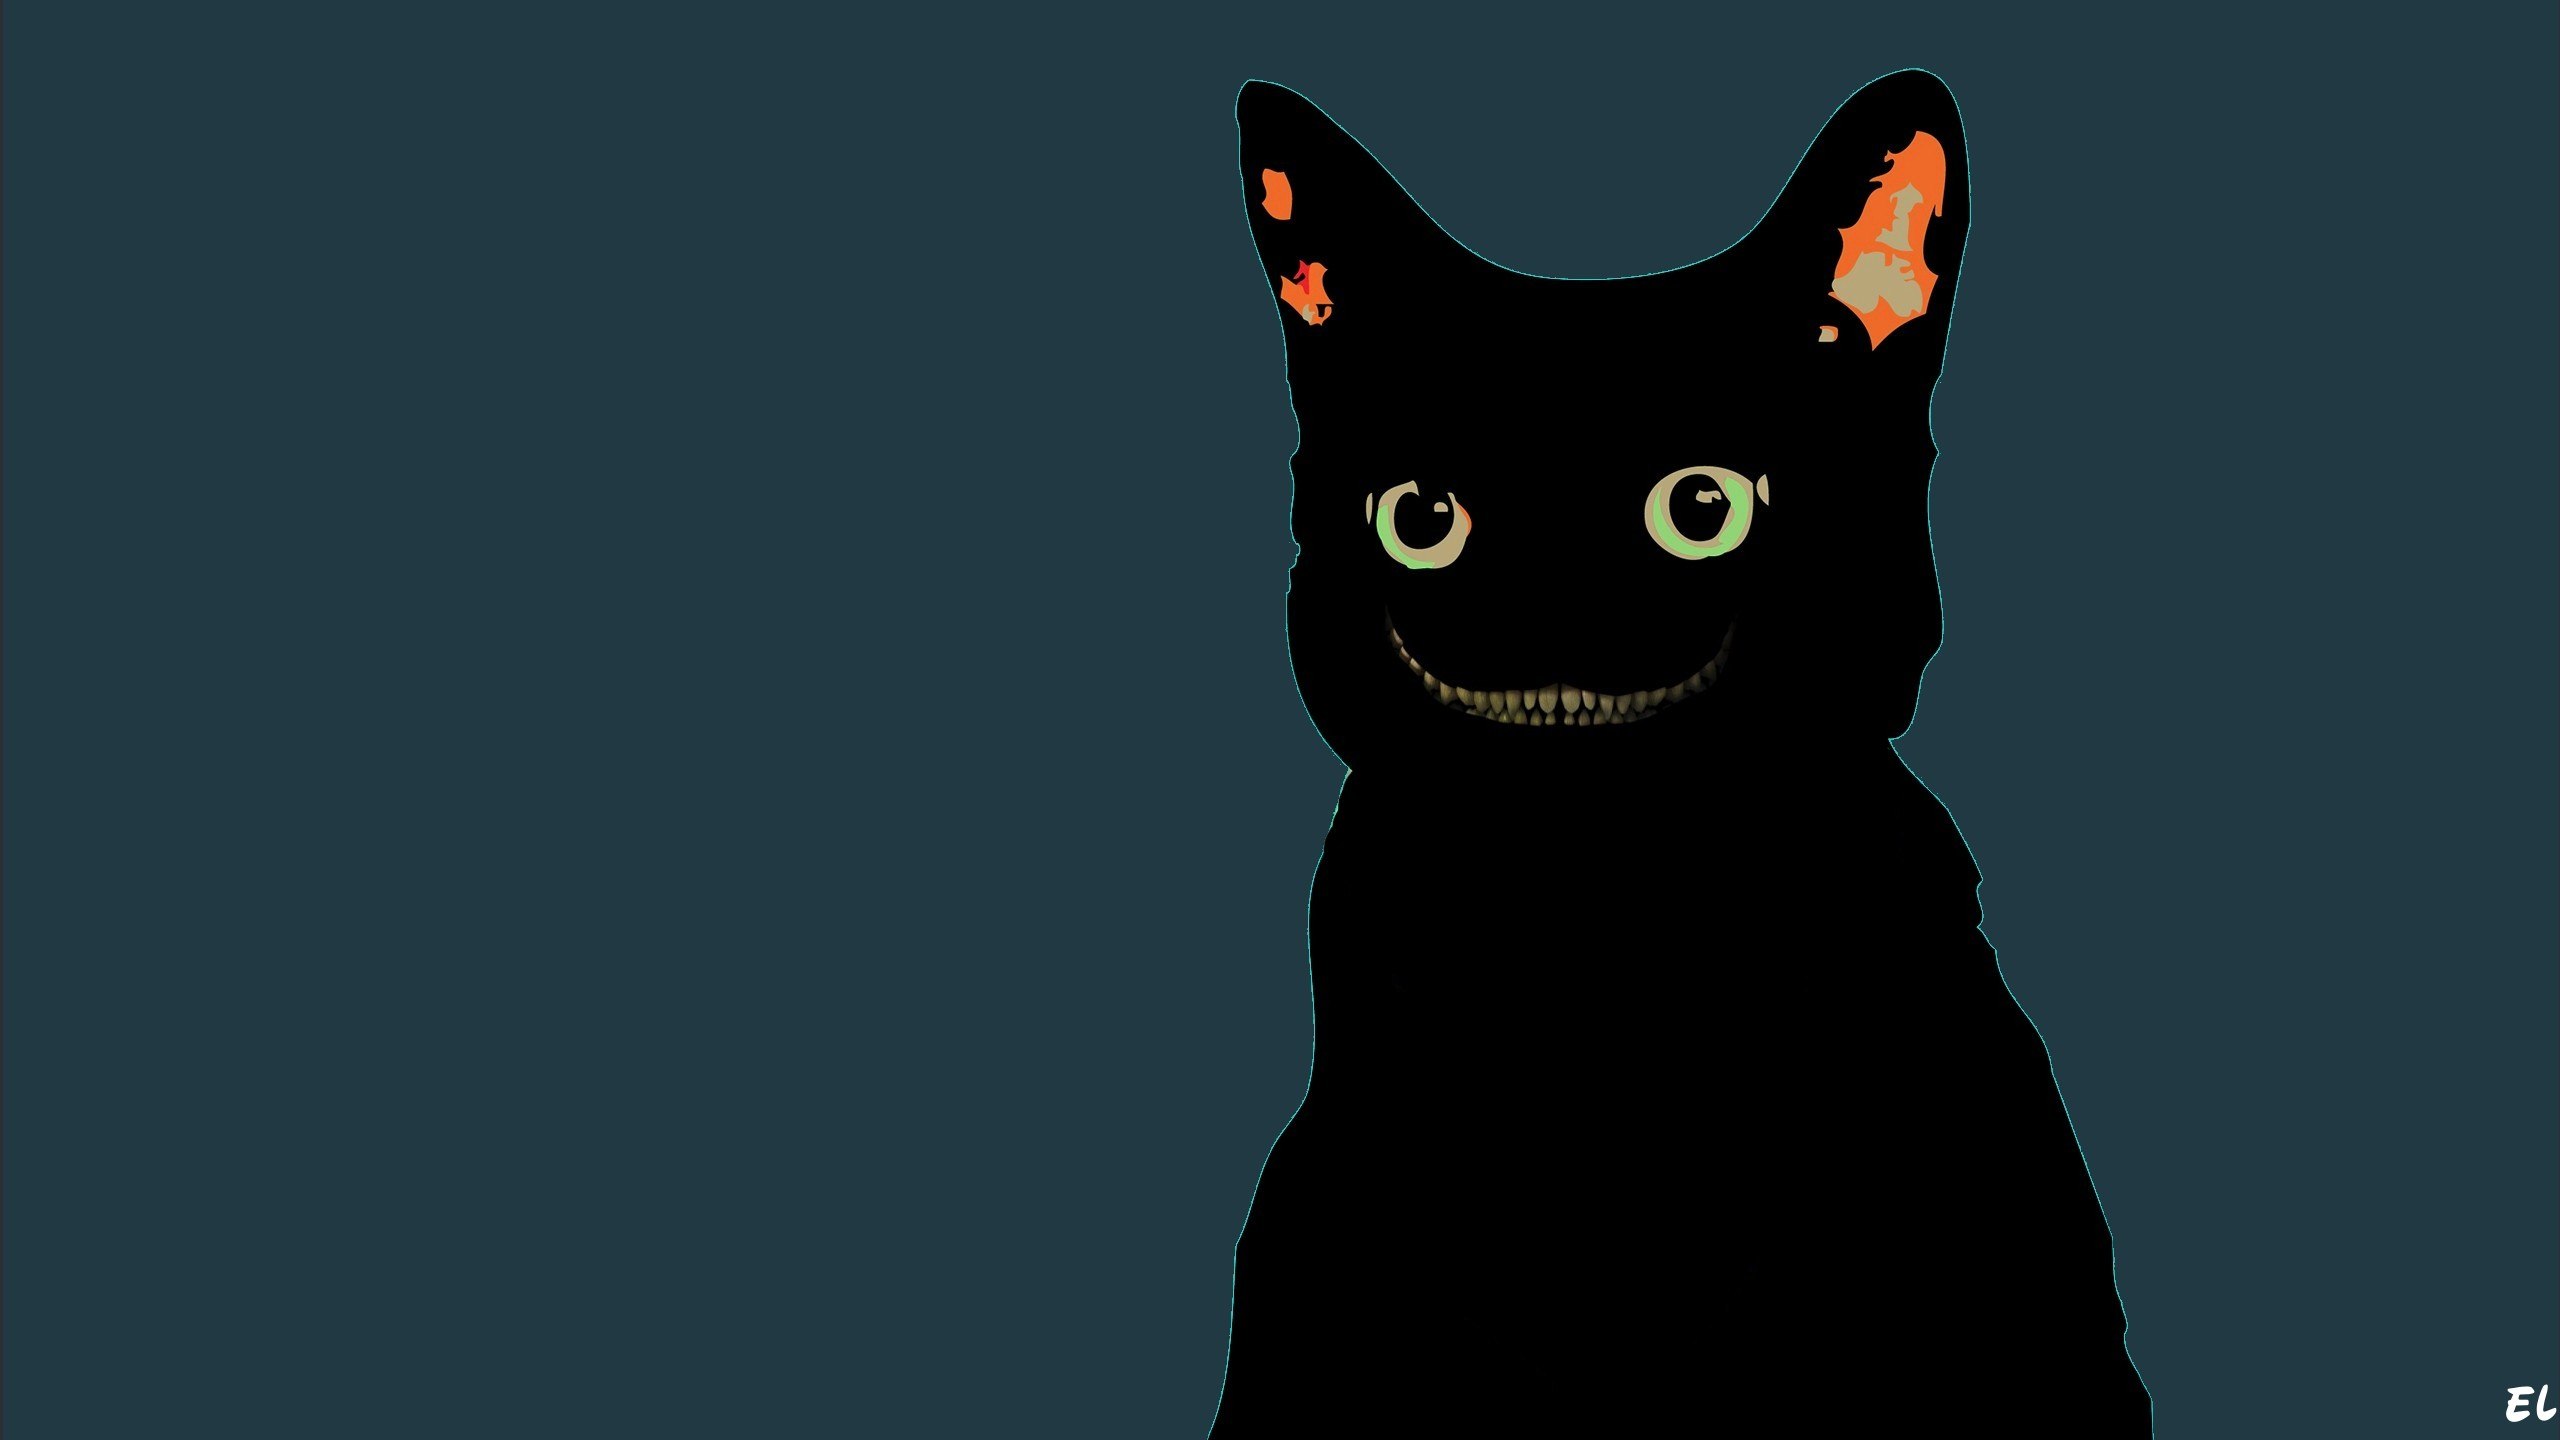 Black cat wallpaper 2560x1440 - (#32392) - High Quality and ...